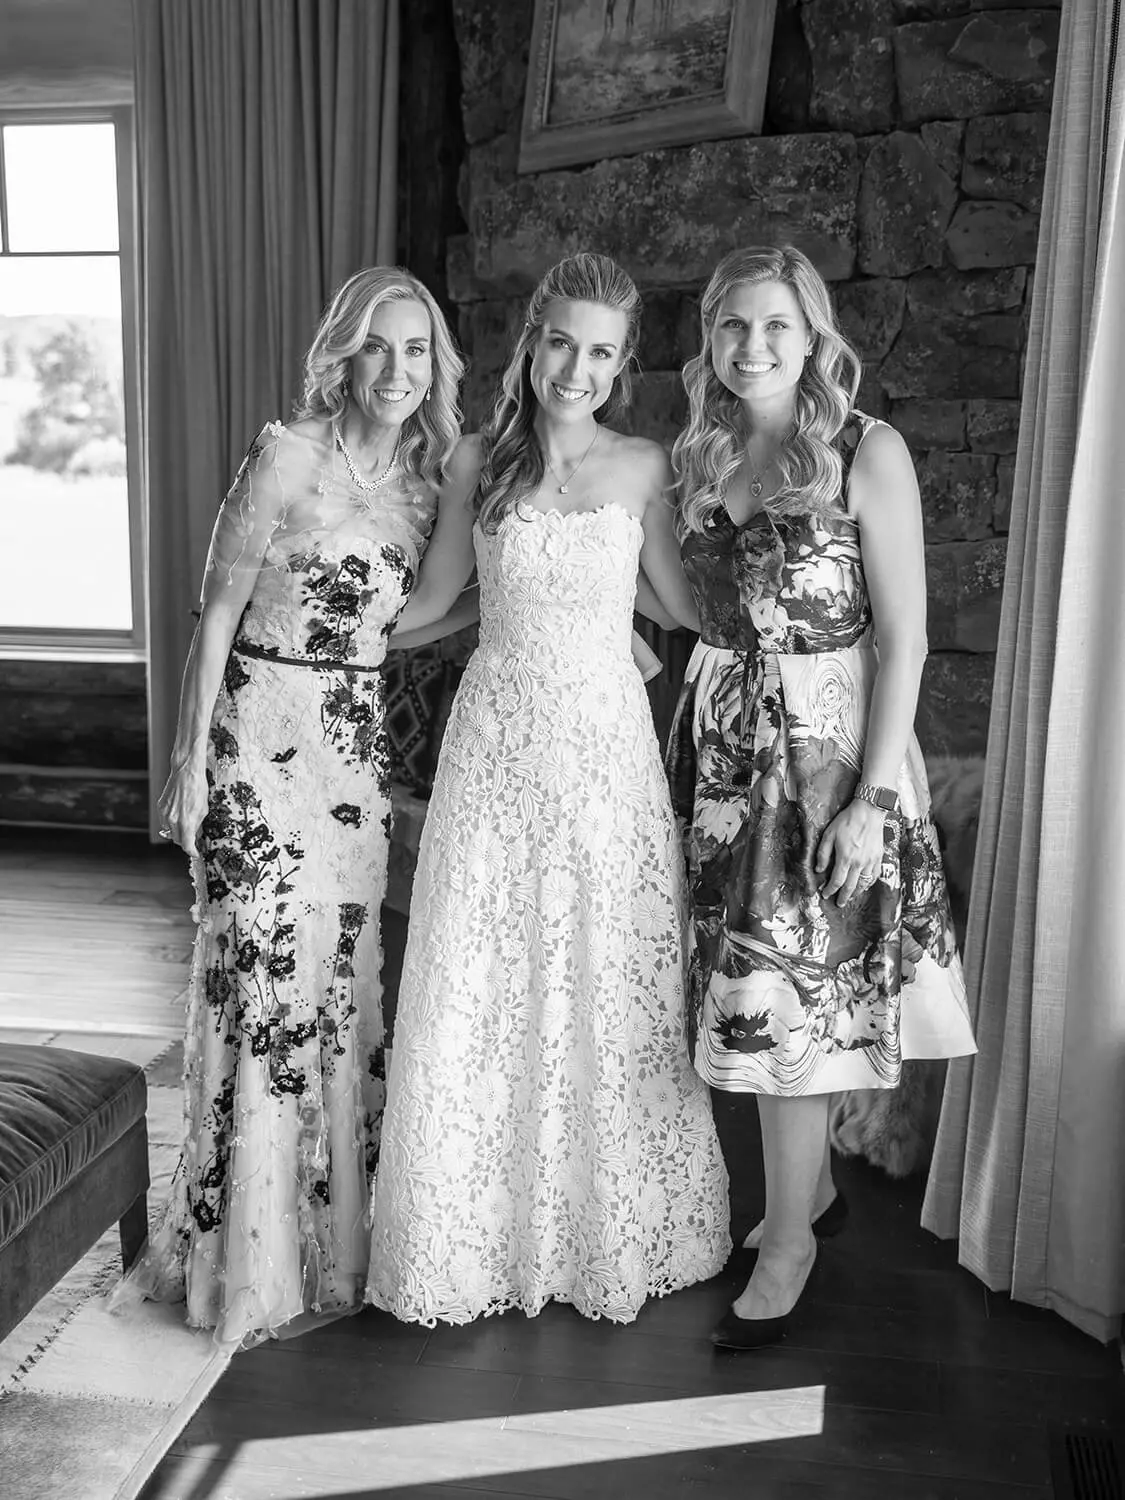 The Stylish Bride Julie and bride, wedding day stylists